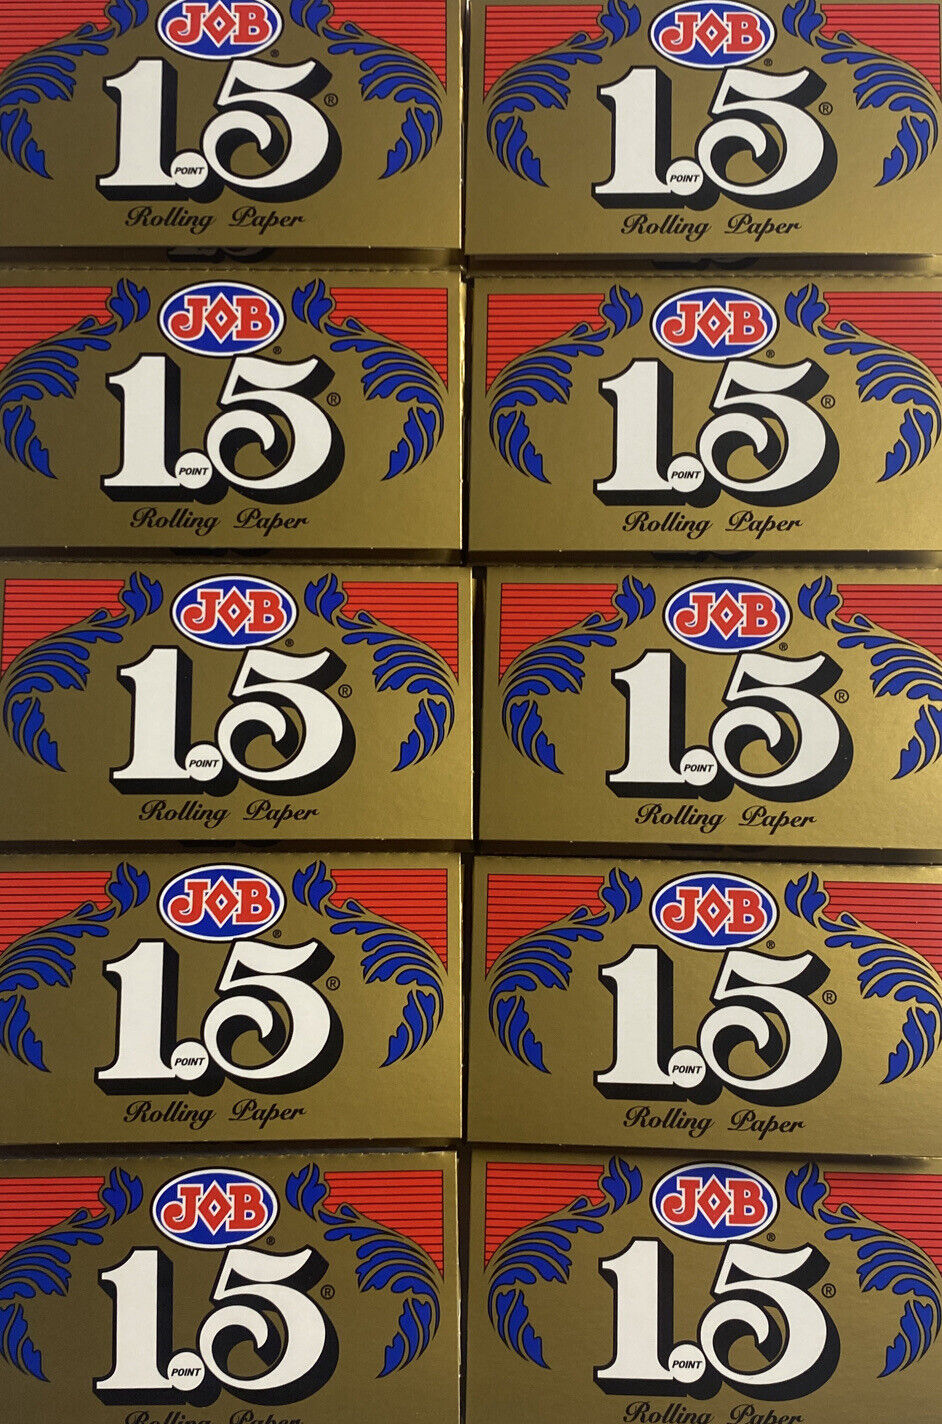 JOB 1.5 Gold Cigarette Rolling Paper (10 Booklets) Ships From Tennessee